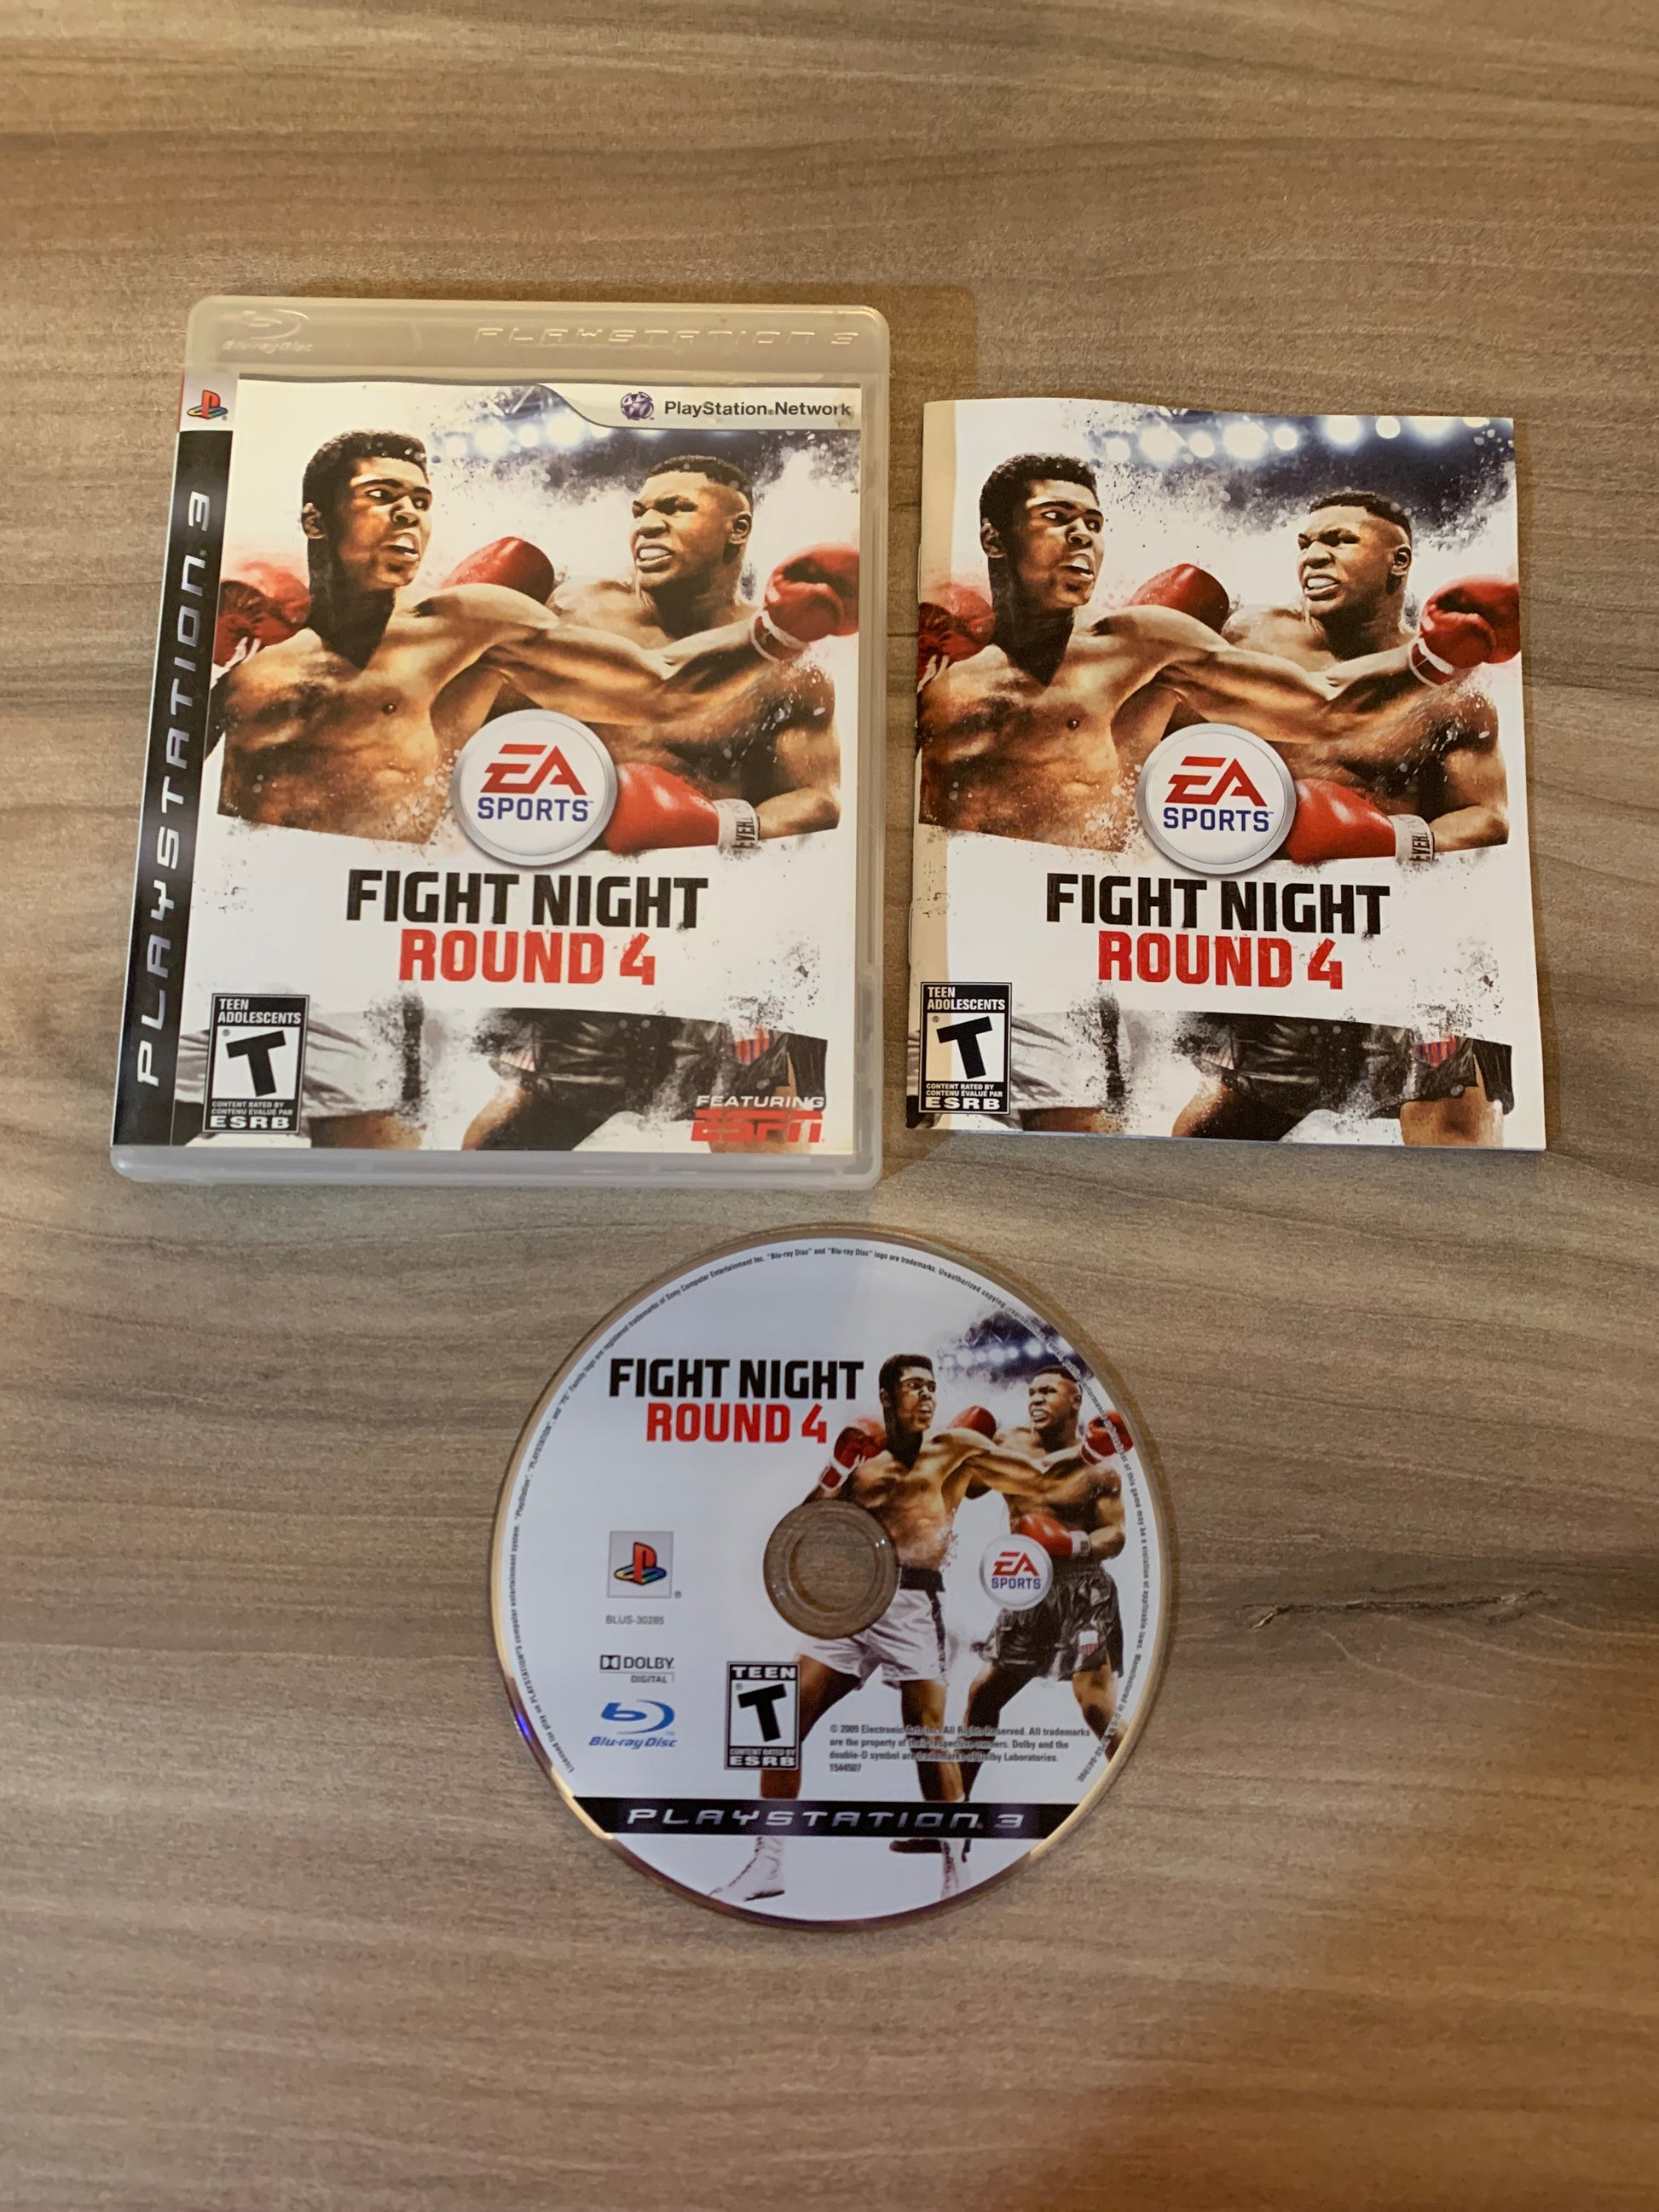 PiXEL-RETRO.COM : SONY PLAYSTATION 3 (PS3) COMPLET CIB BOX MANUAL GAME NTSC FIGHT NIGHT ROUND 4